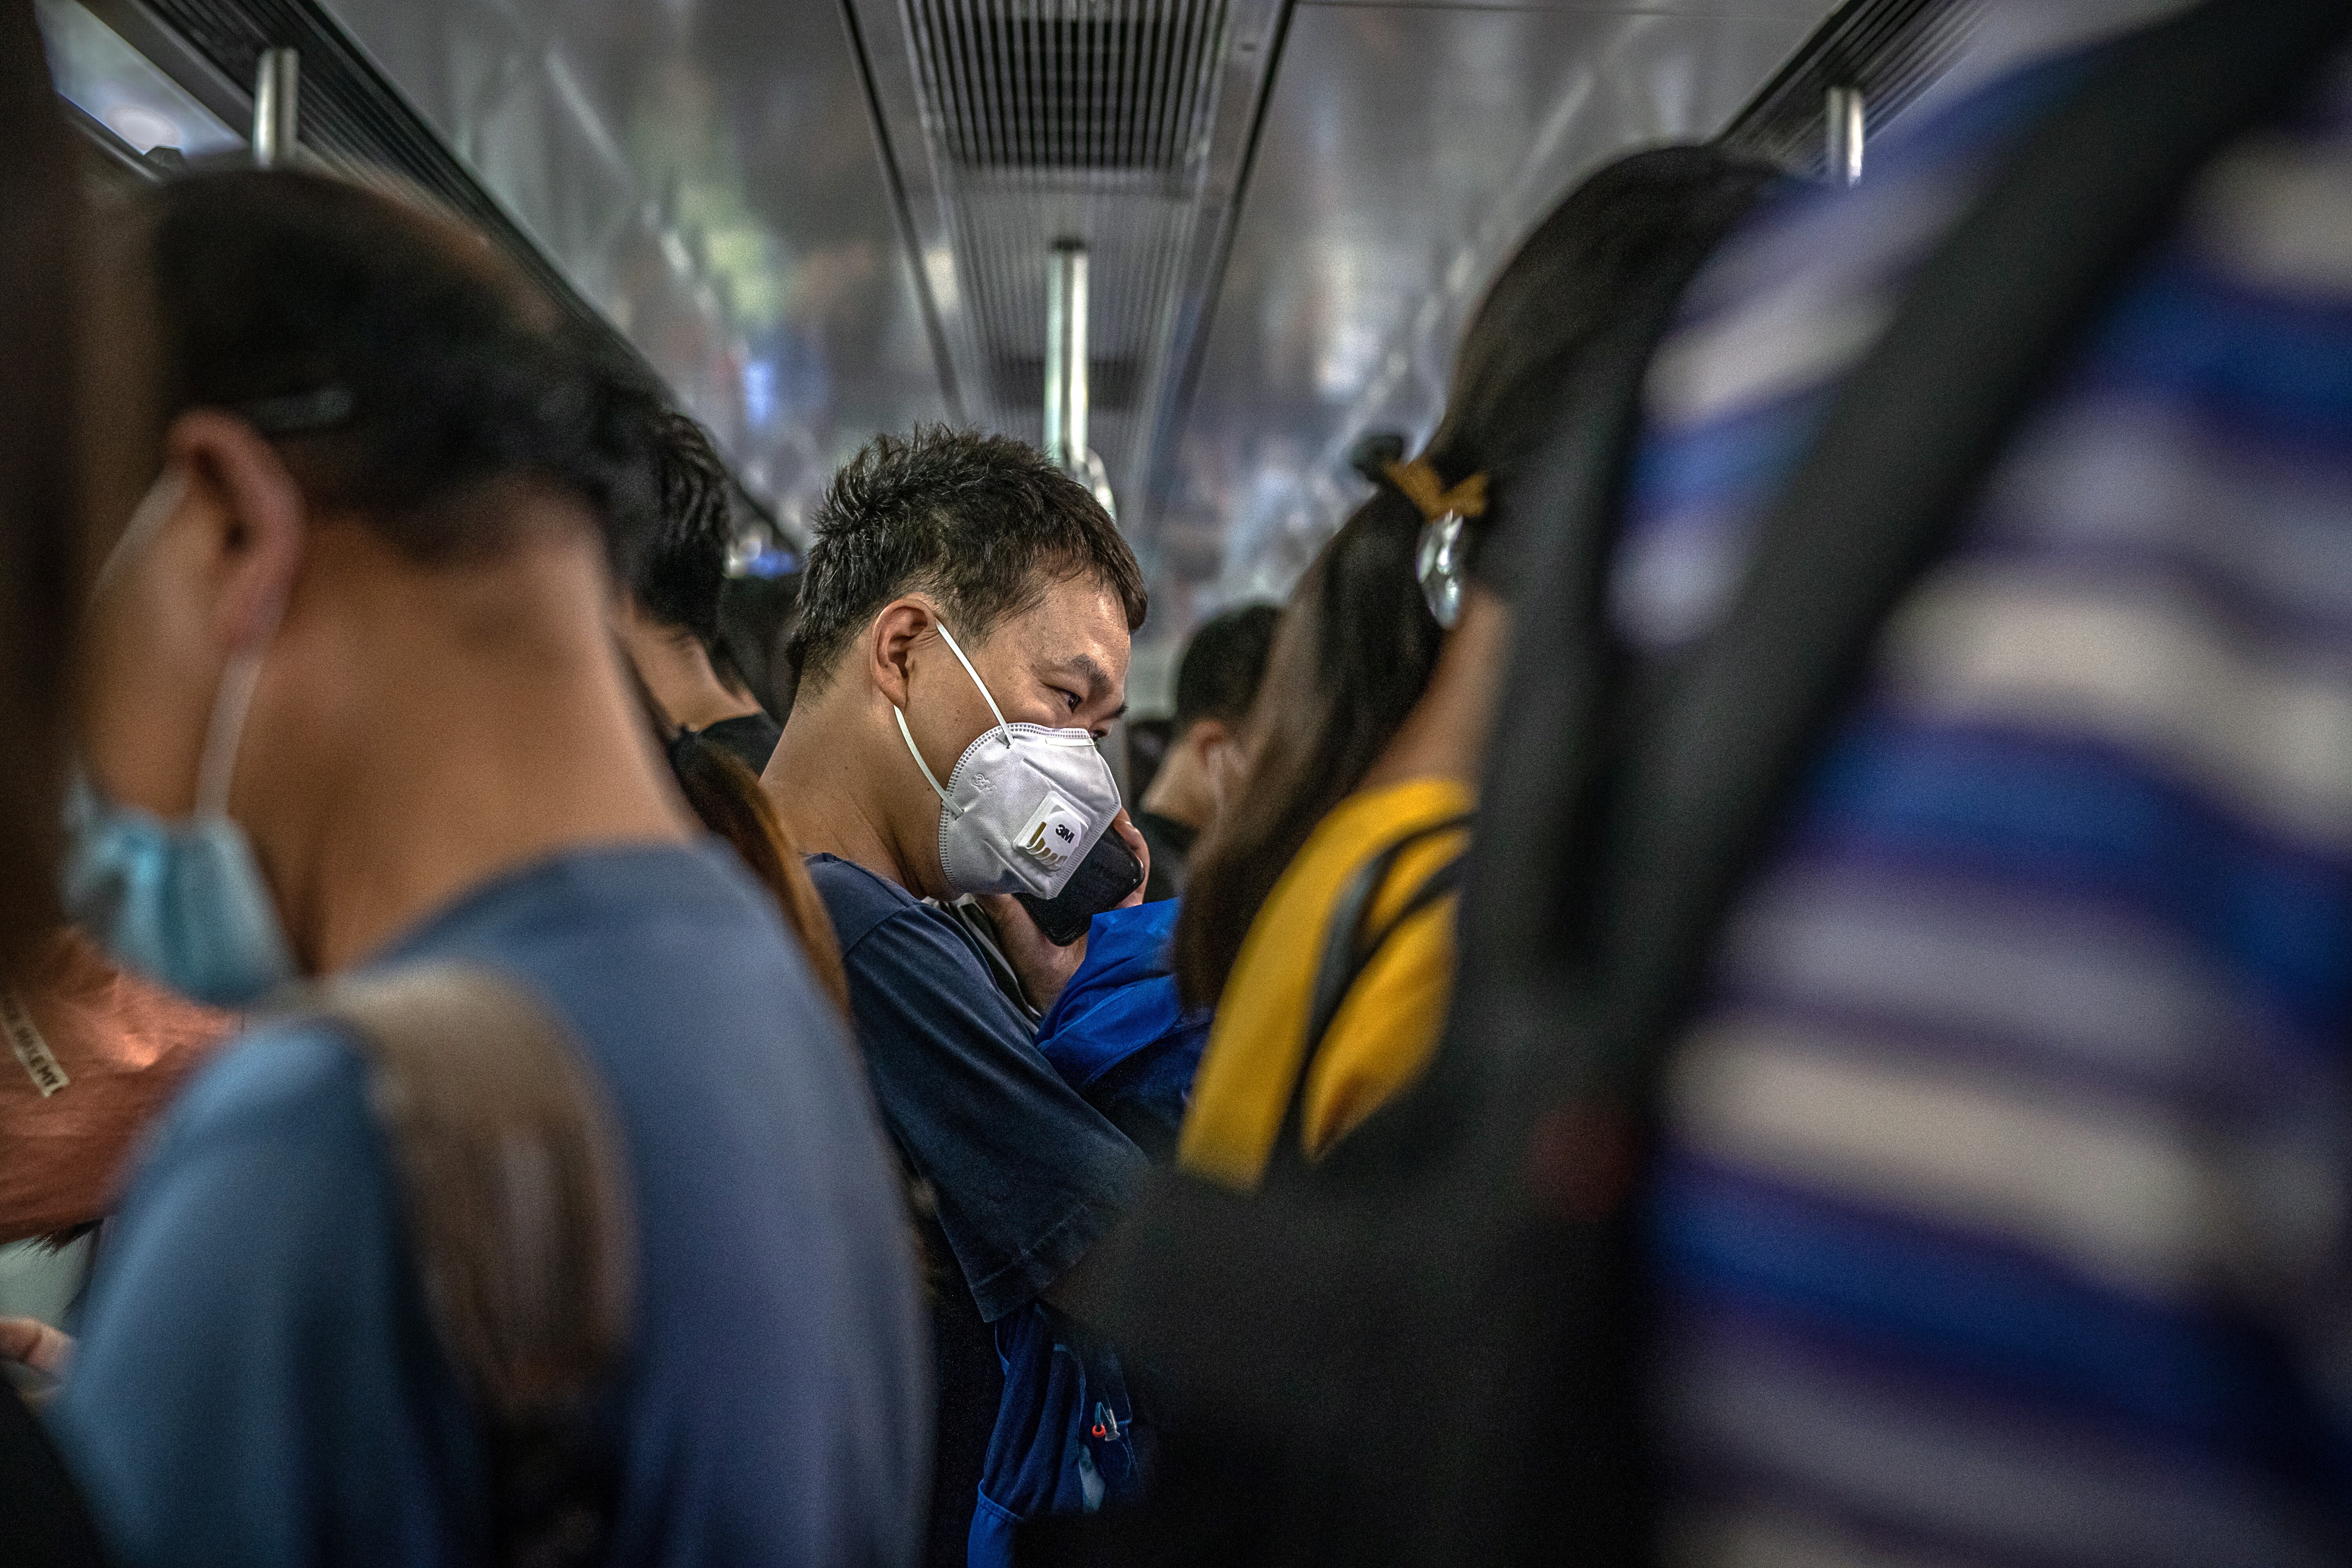 People wearing protective face masks ride the subway in Beijing during evening rush hour on June 18, a week after the city was hit by a second wave of Covid-19 infections. Passenger numbers dipped on news of the mini outbreak, but to nowhere near the lows experienced during January and February. Photo: EPA-EFE